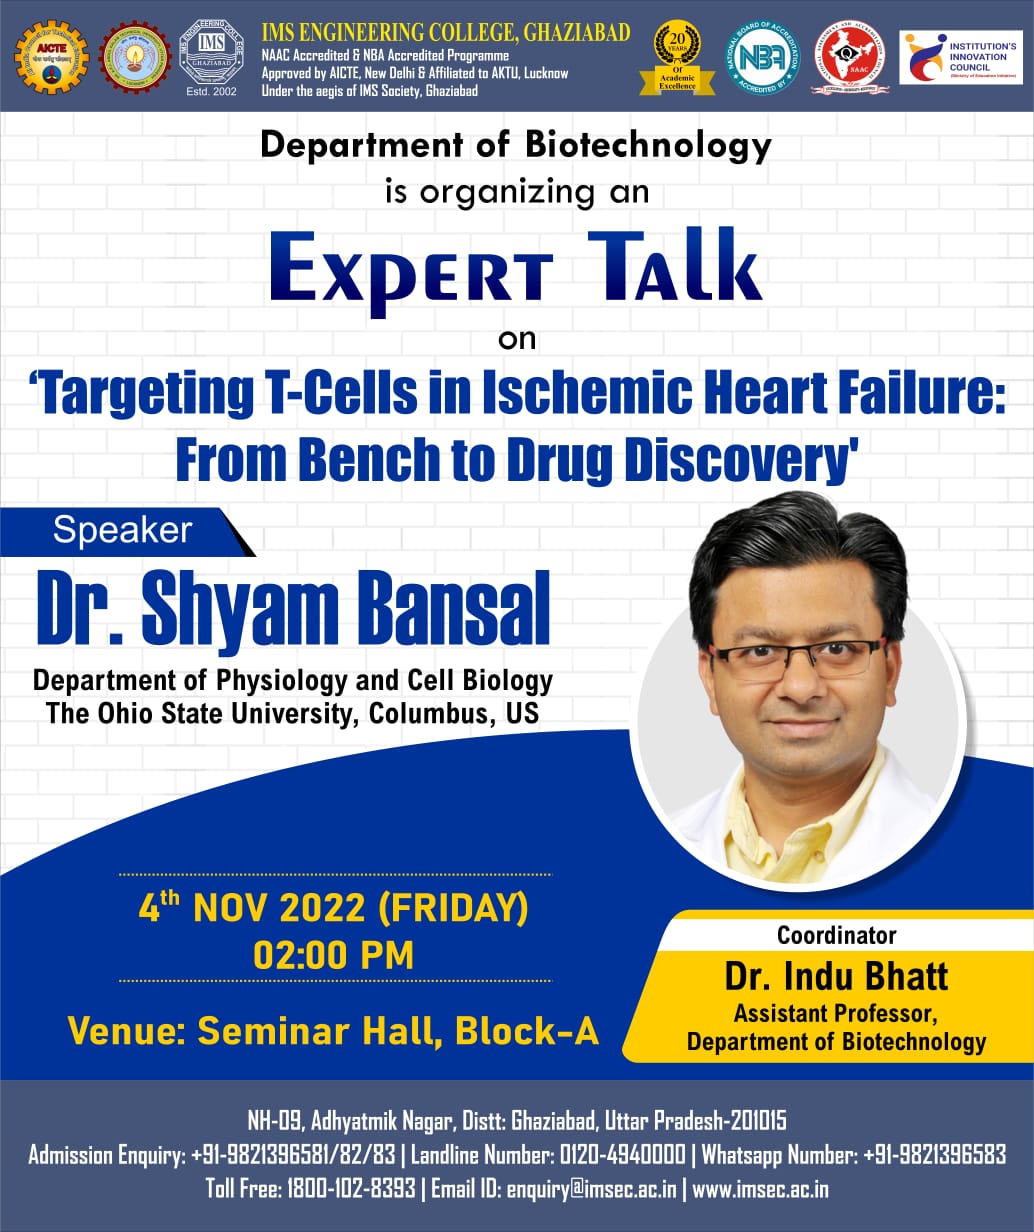 Expert talk entitled Targeting T-cells in Ischemic Heart Failure- From Bench to Drug Discovery